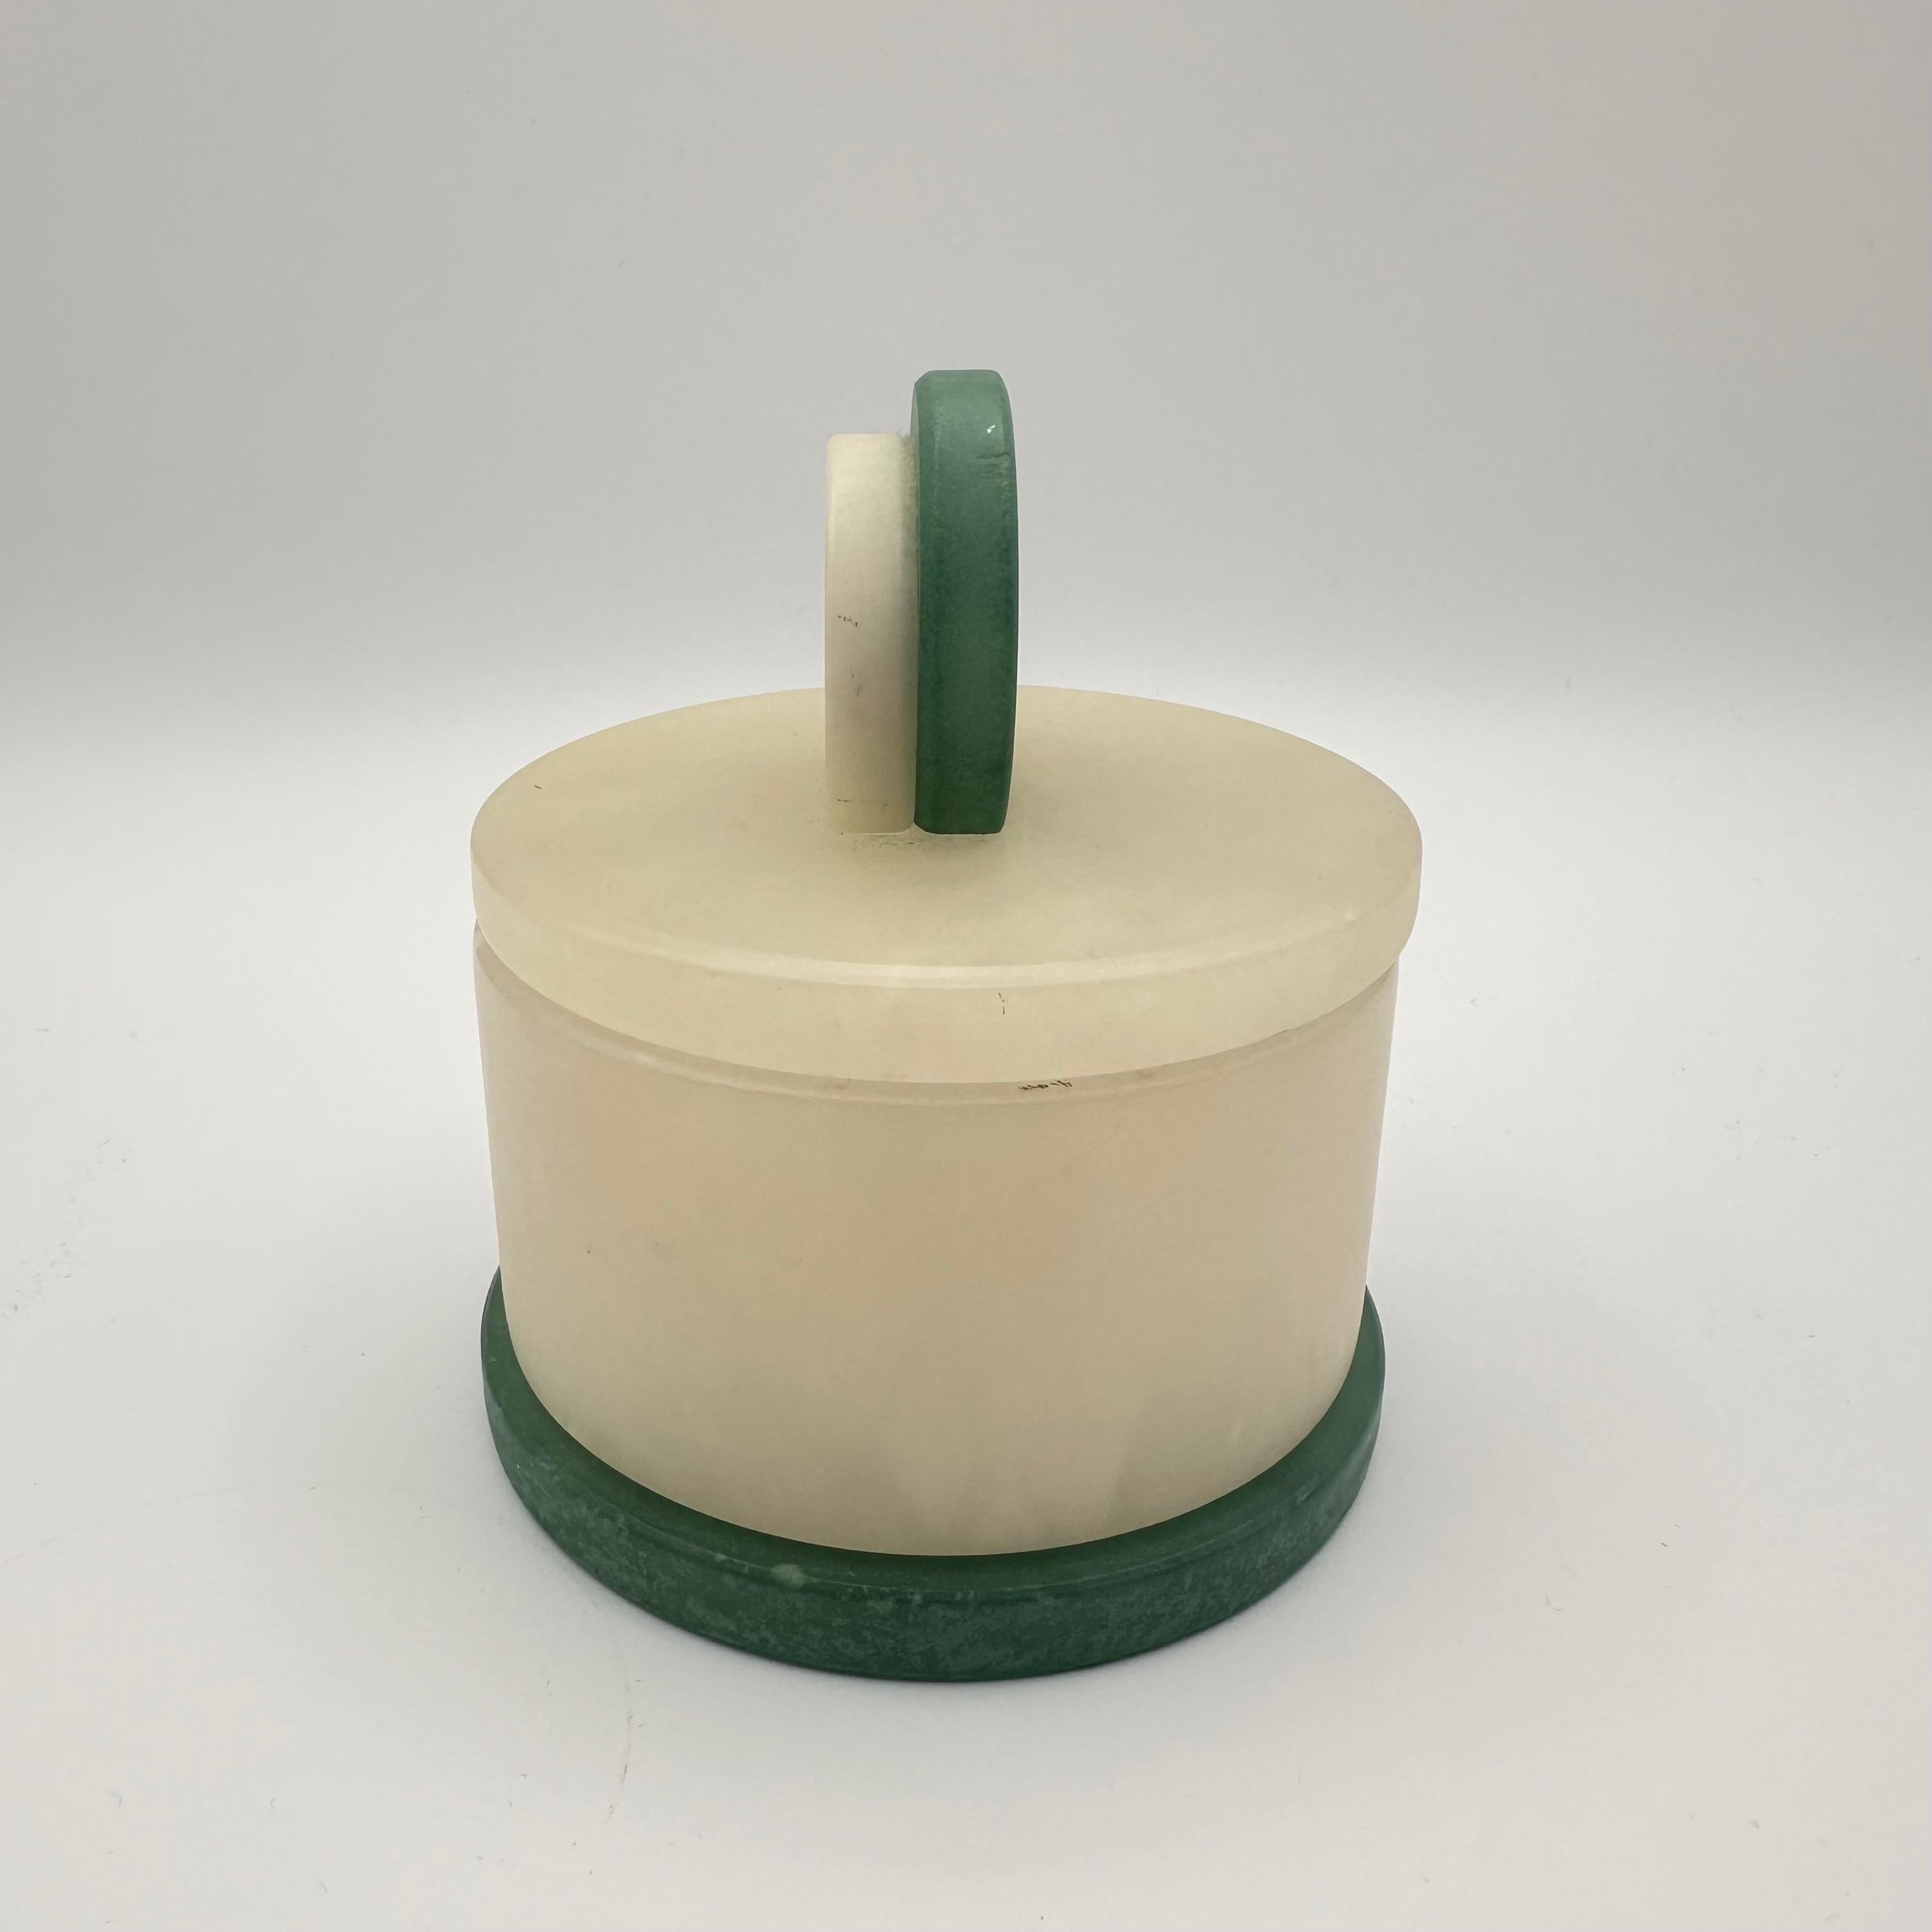 Vintage Art Deco Style Round Lidded Stone Box with White and Green  In Good Condition For Sale In Amityville, NY